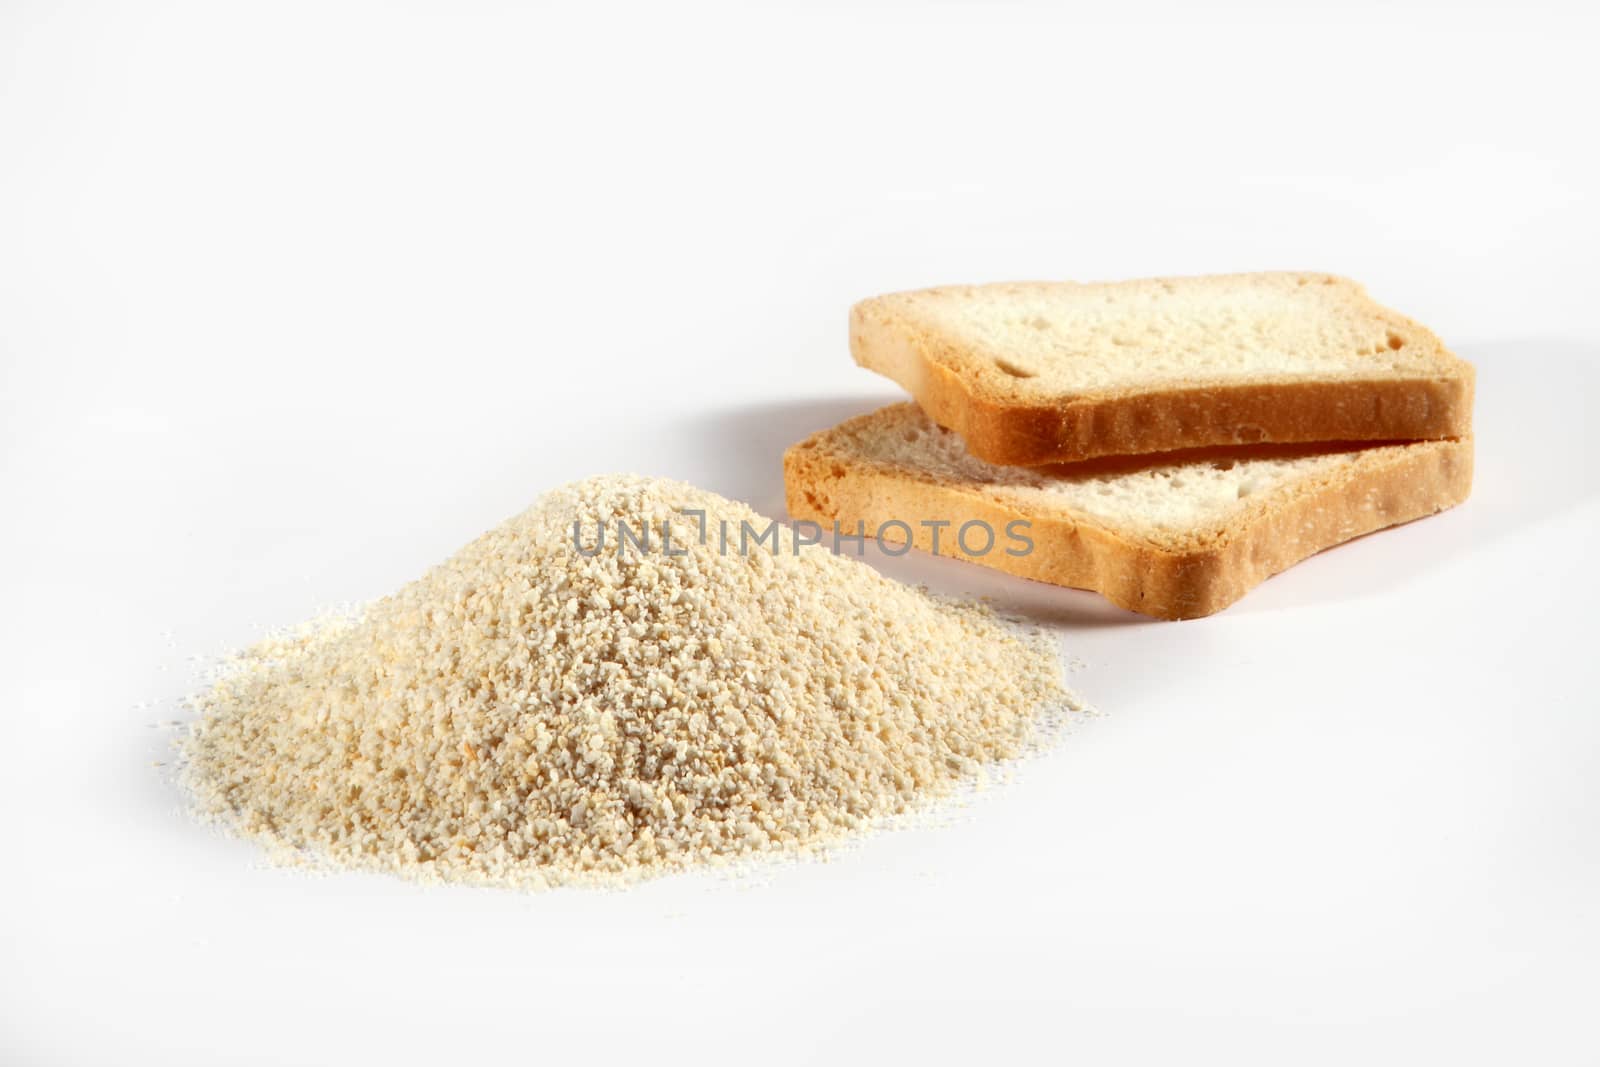 biscuits and bread crumbs on white background